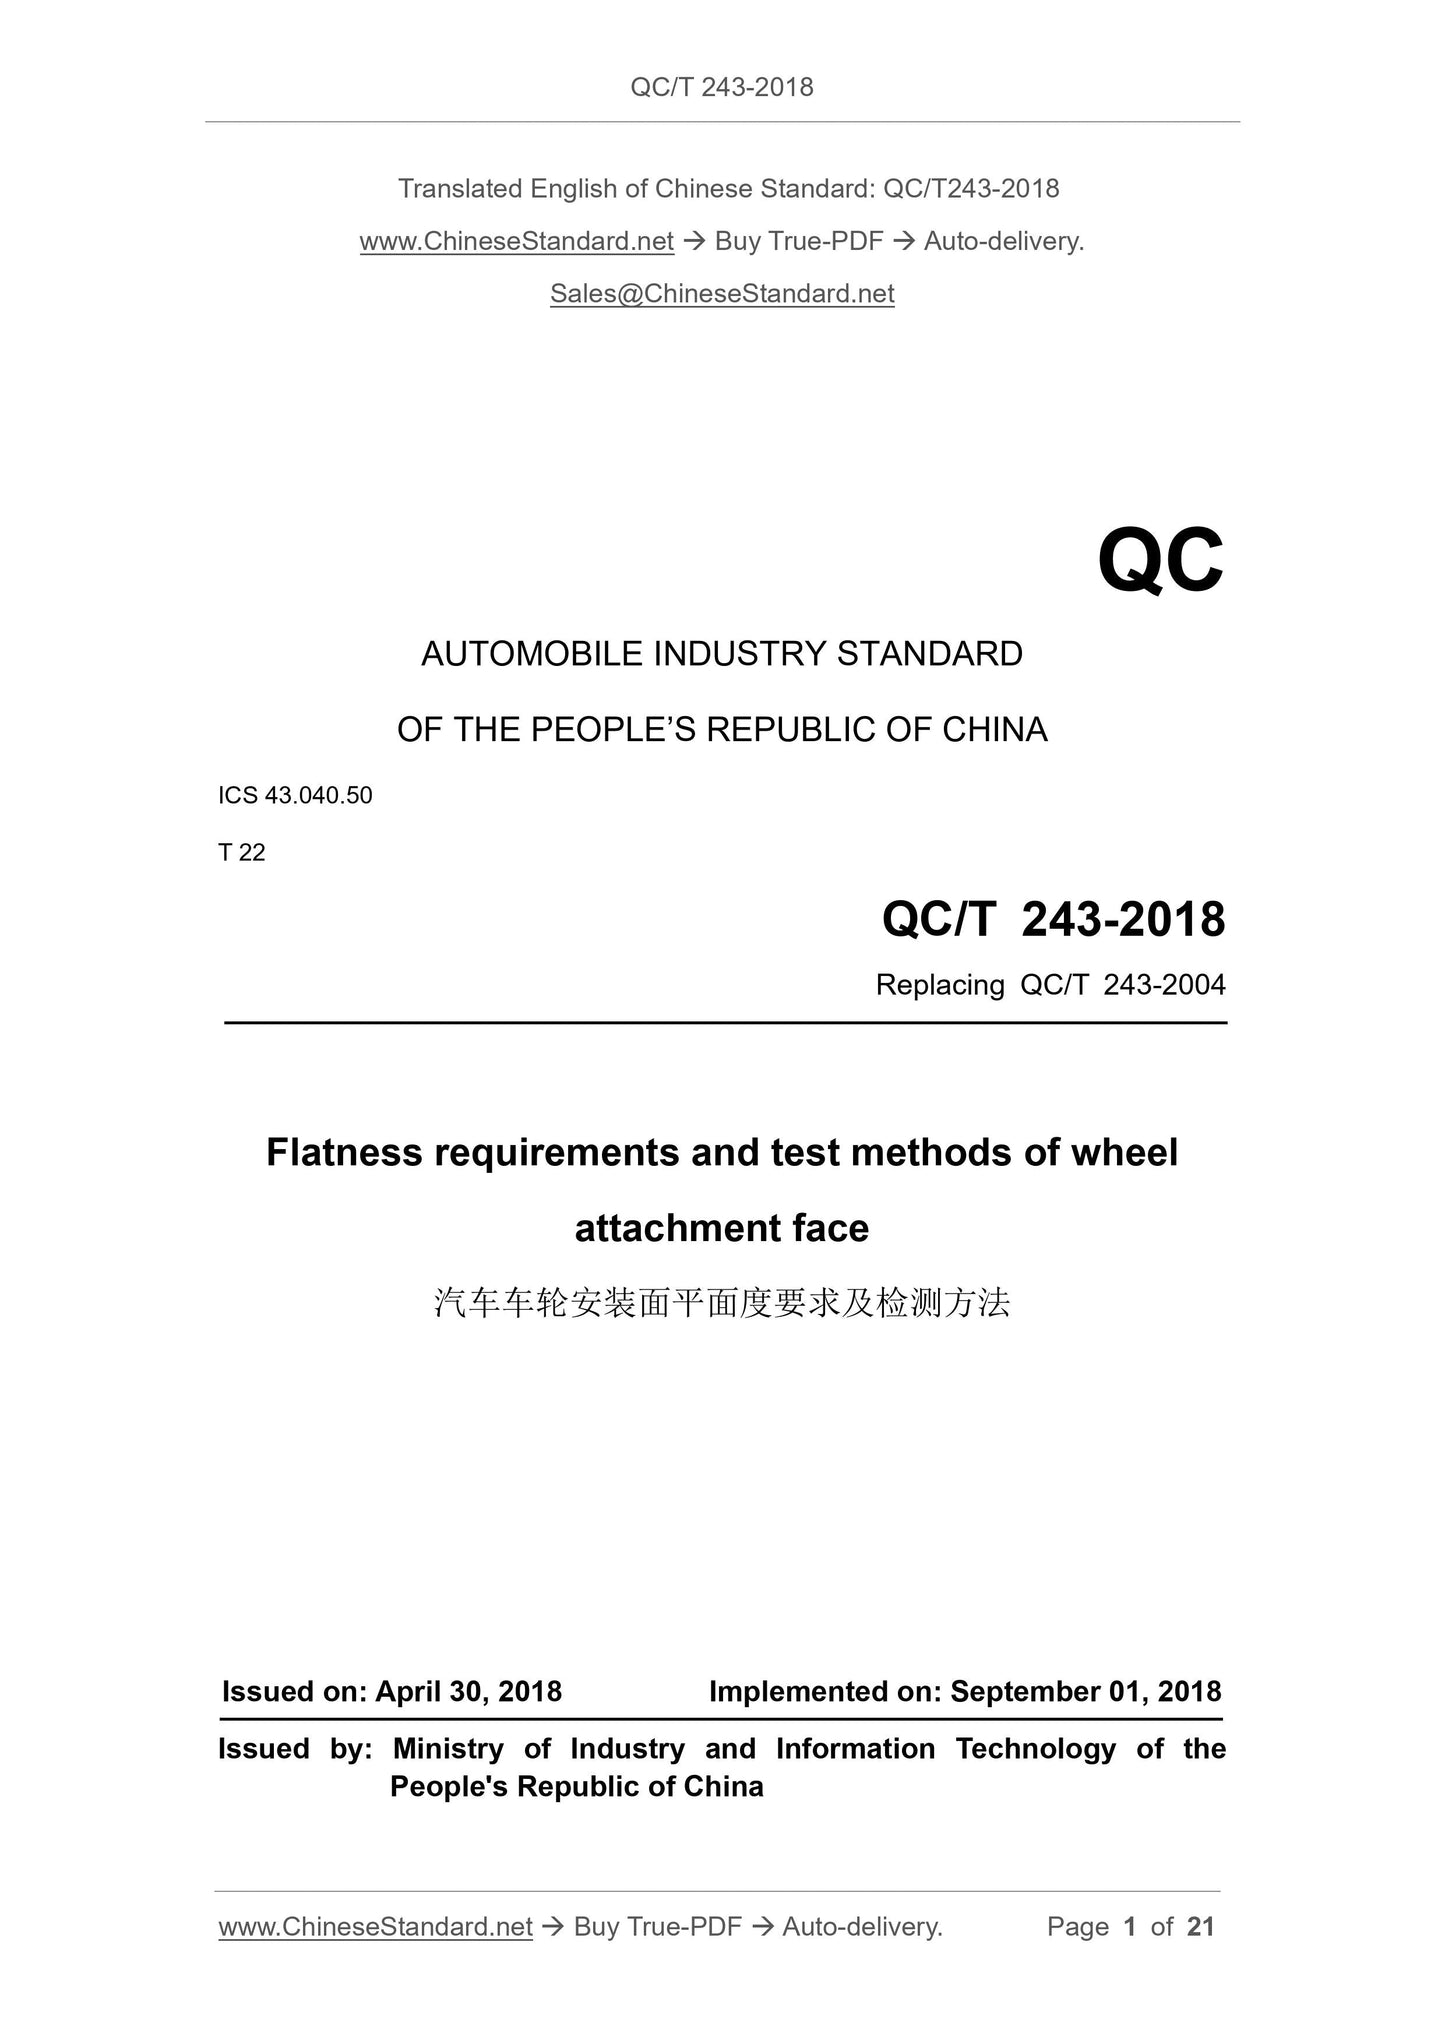 QC/T 243-2018 Page 1